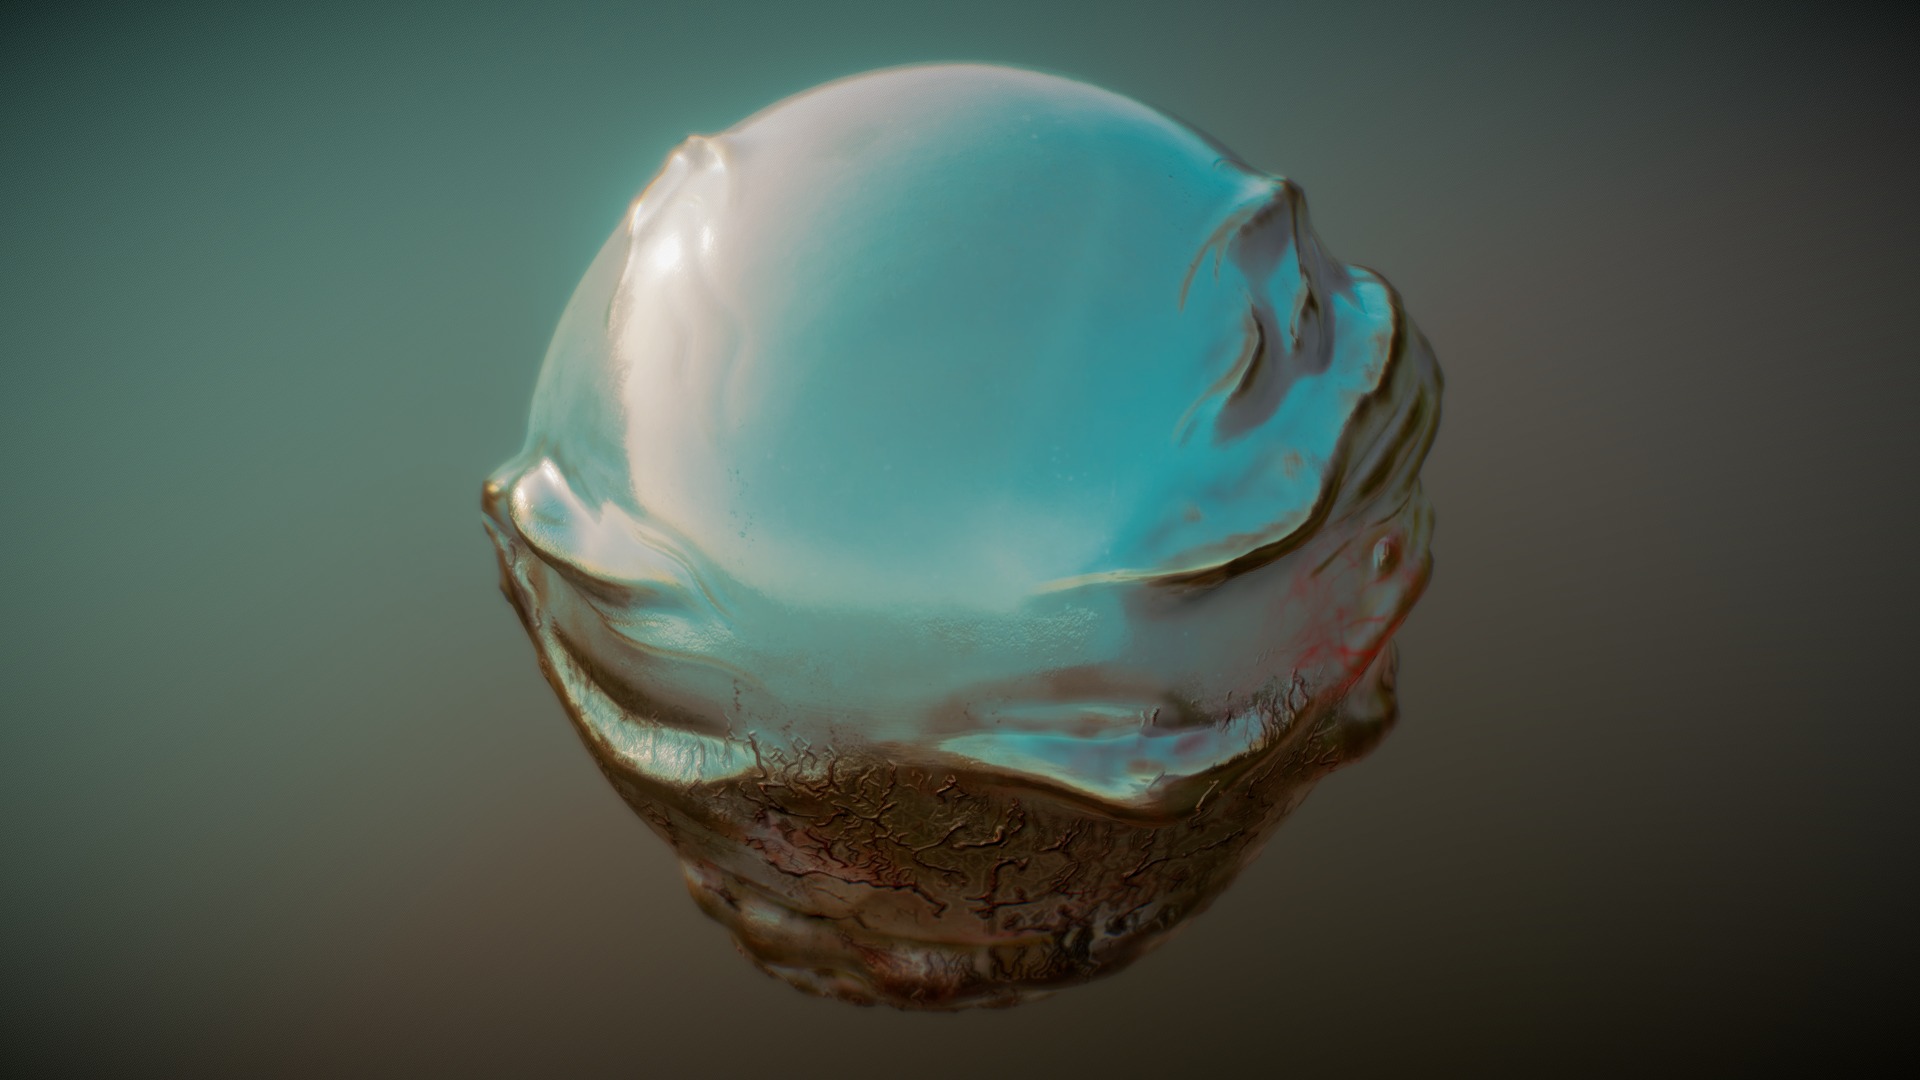 3D model Story Yolk - This is a 3D model of the Story Yolk. The 3D model is about a close-up of a glass globe.